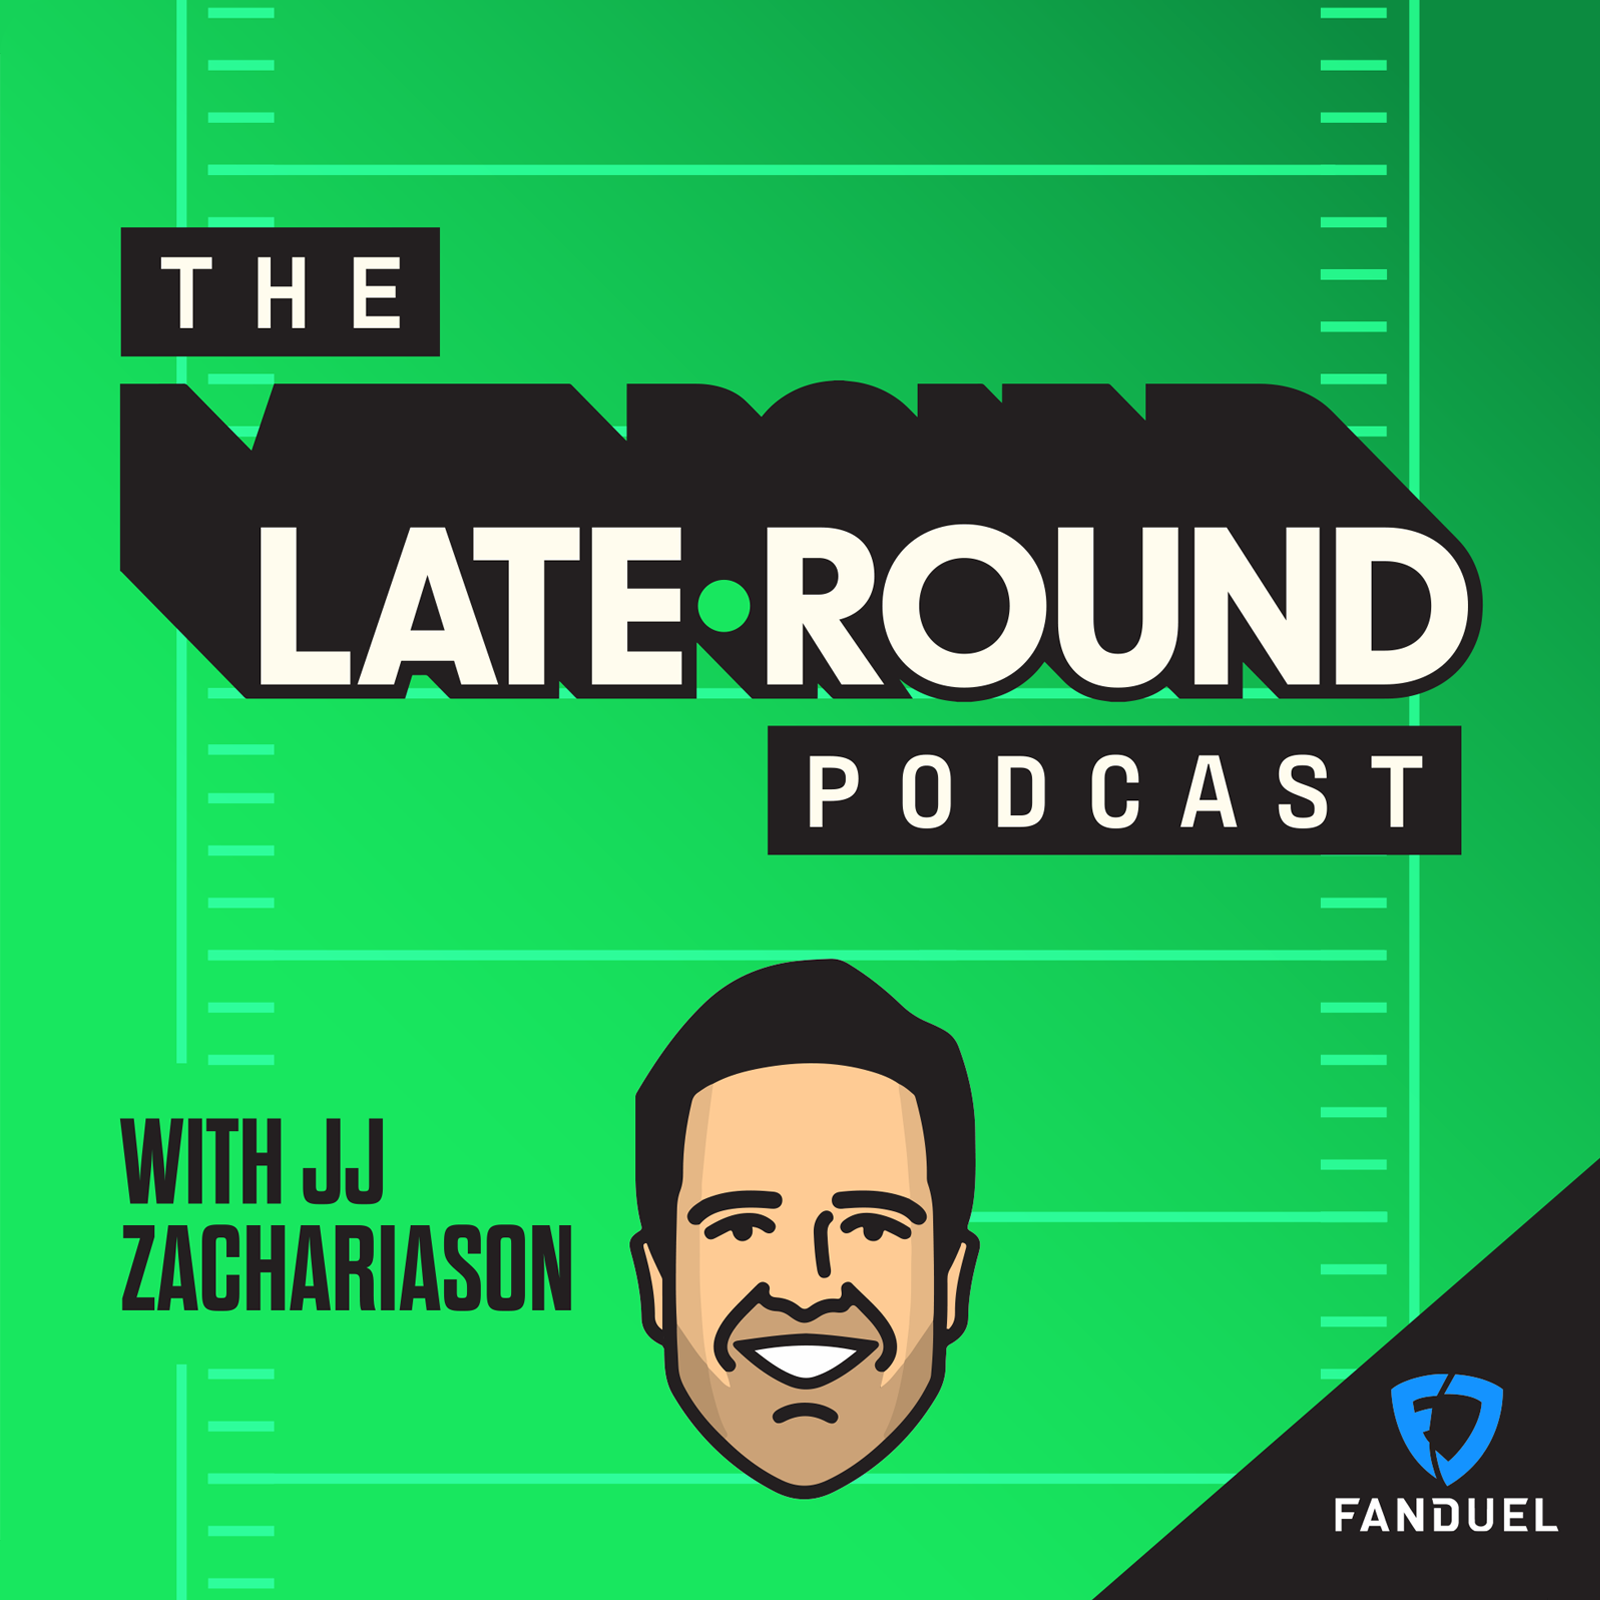 THE LATE ROUND PODCAST